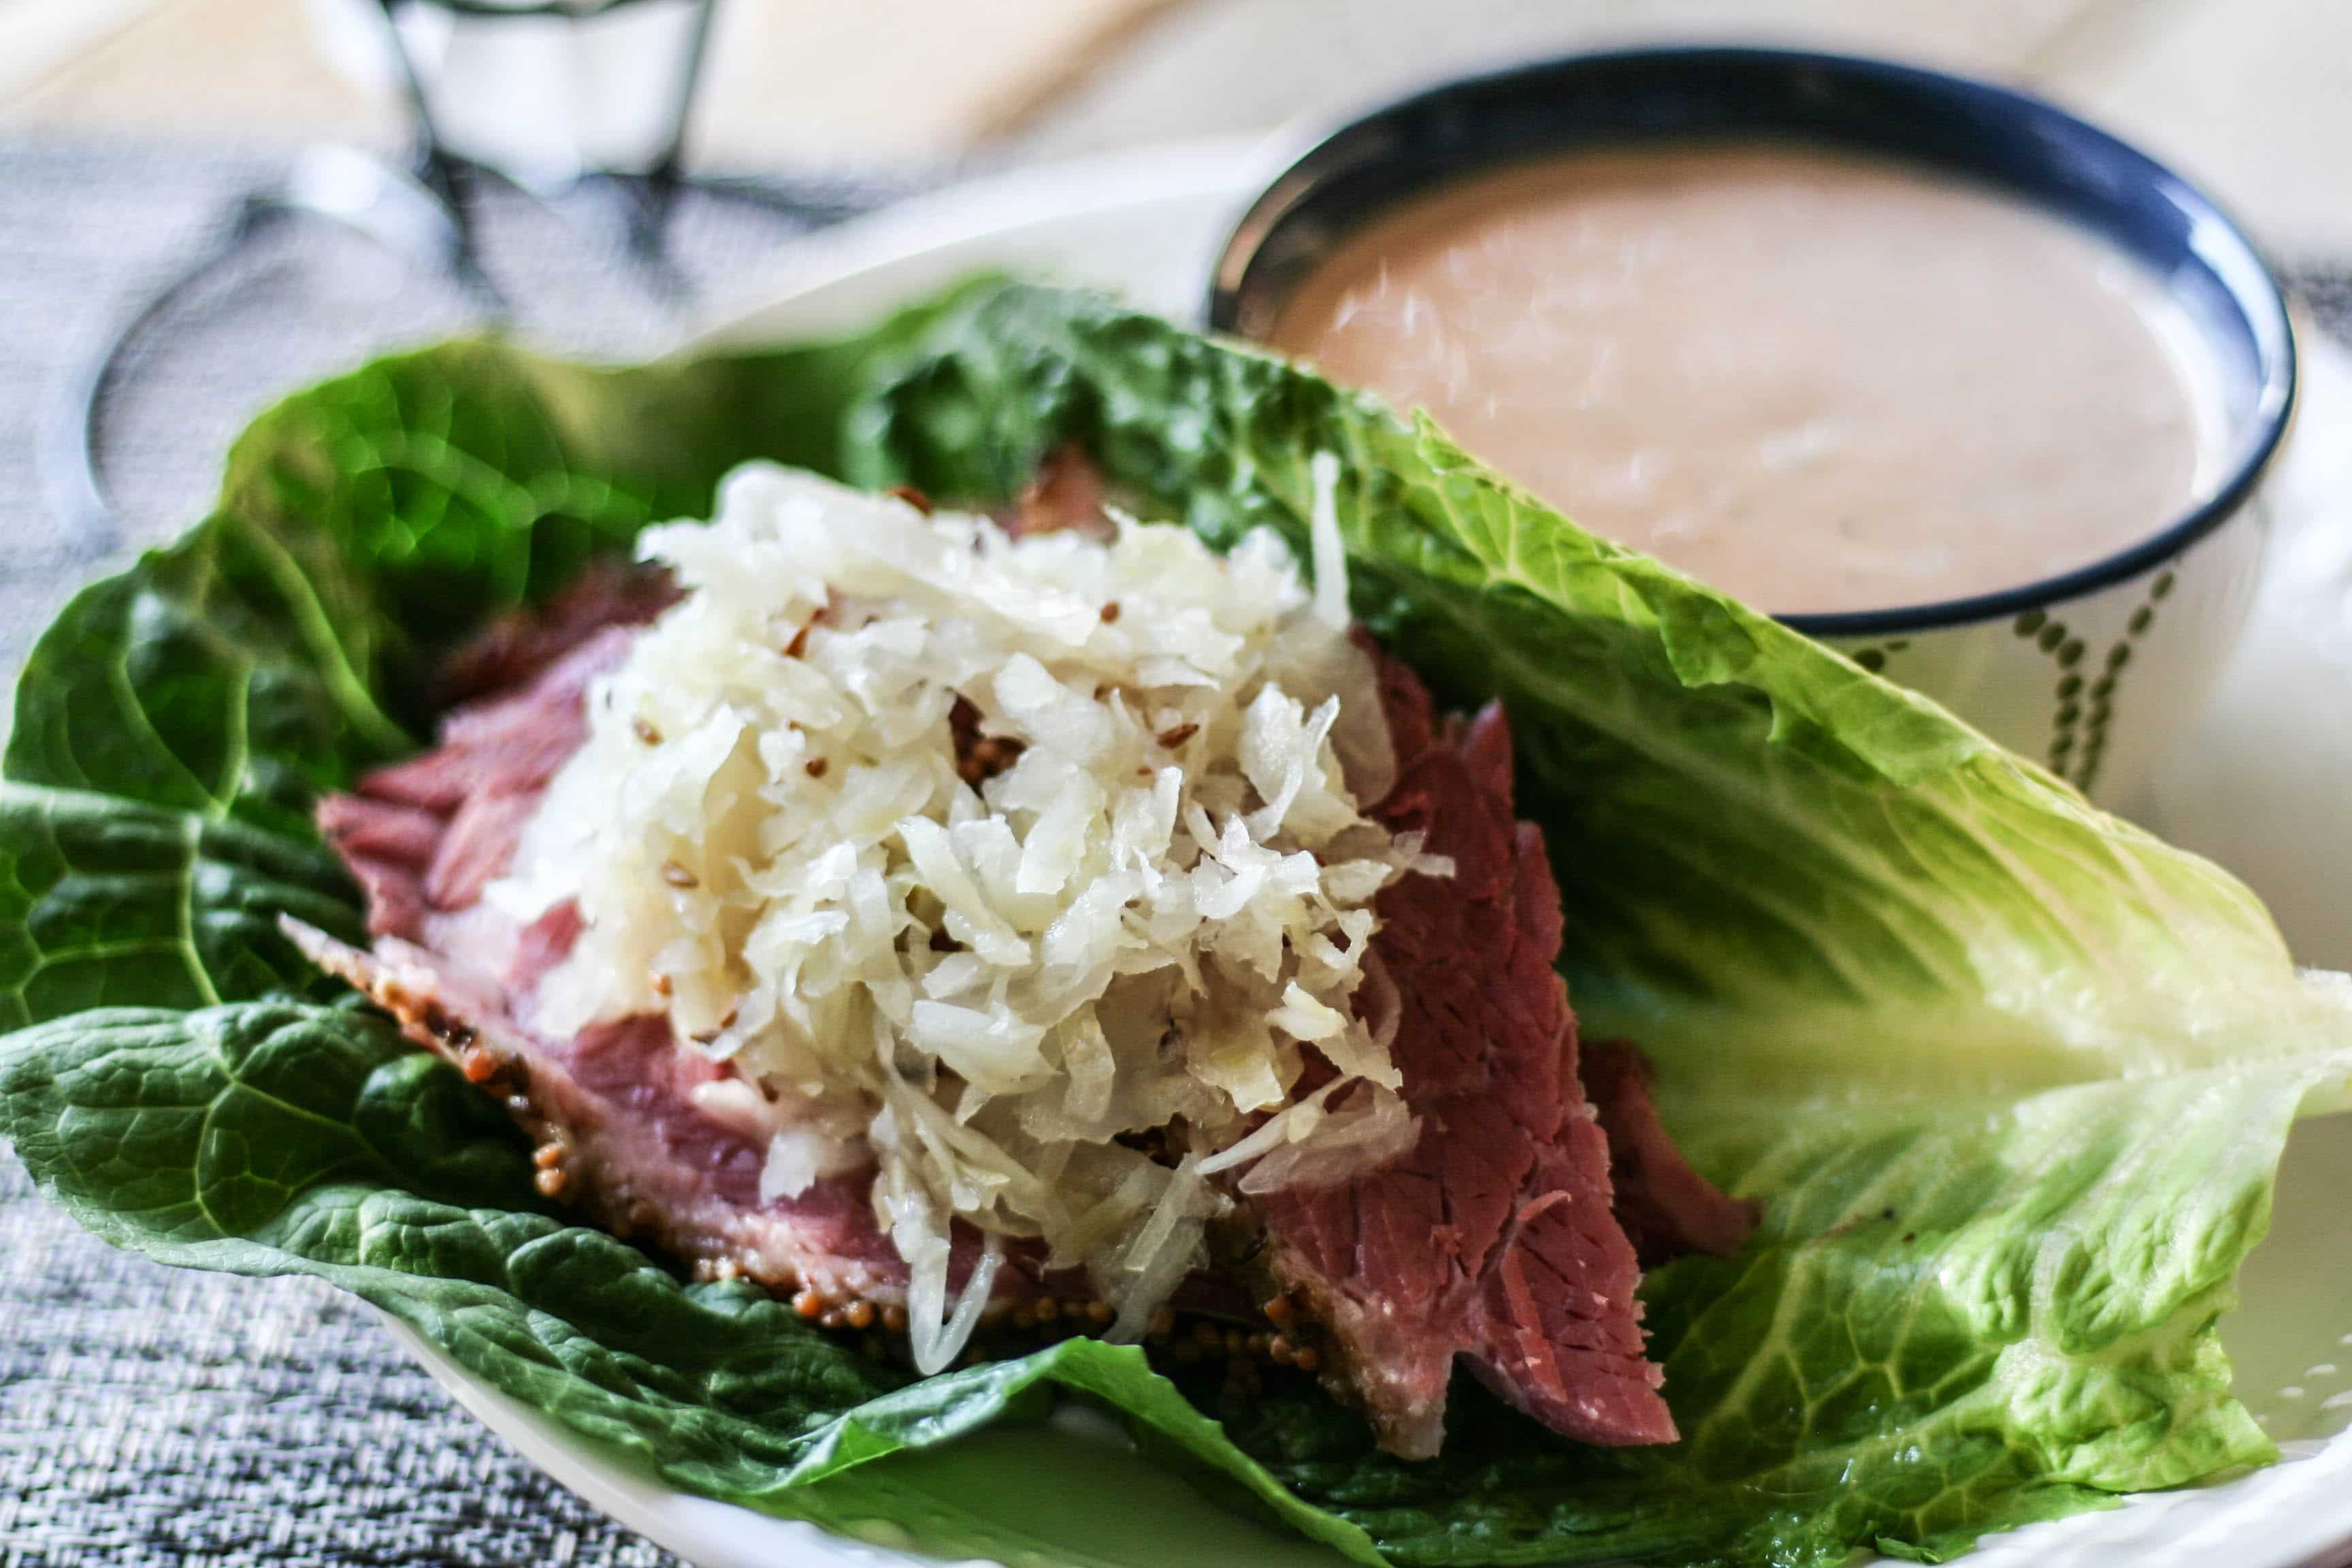 a Paleo Reuben lettuce wrap on a plate with a side of Paleo thousand island dressing